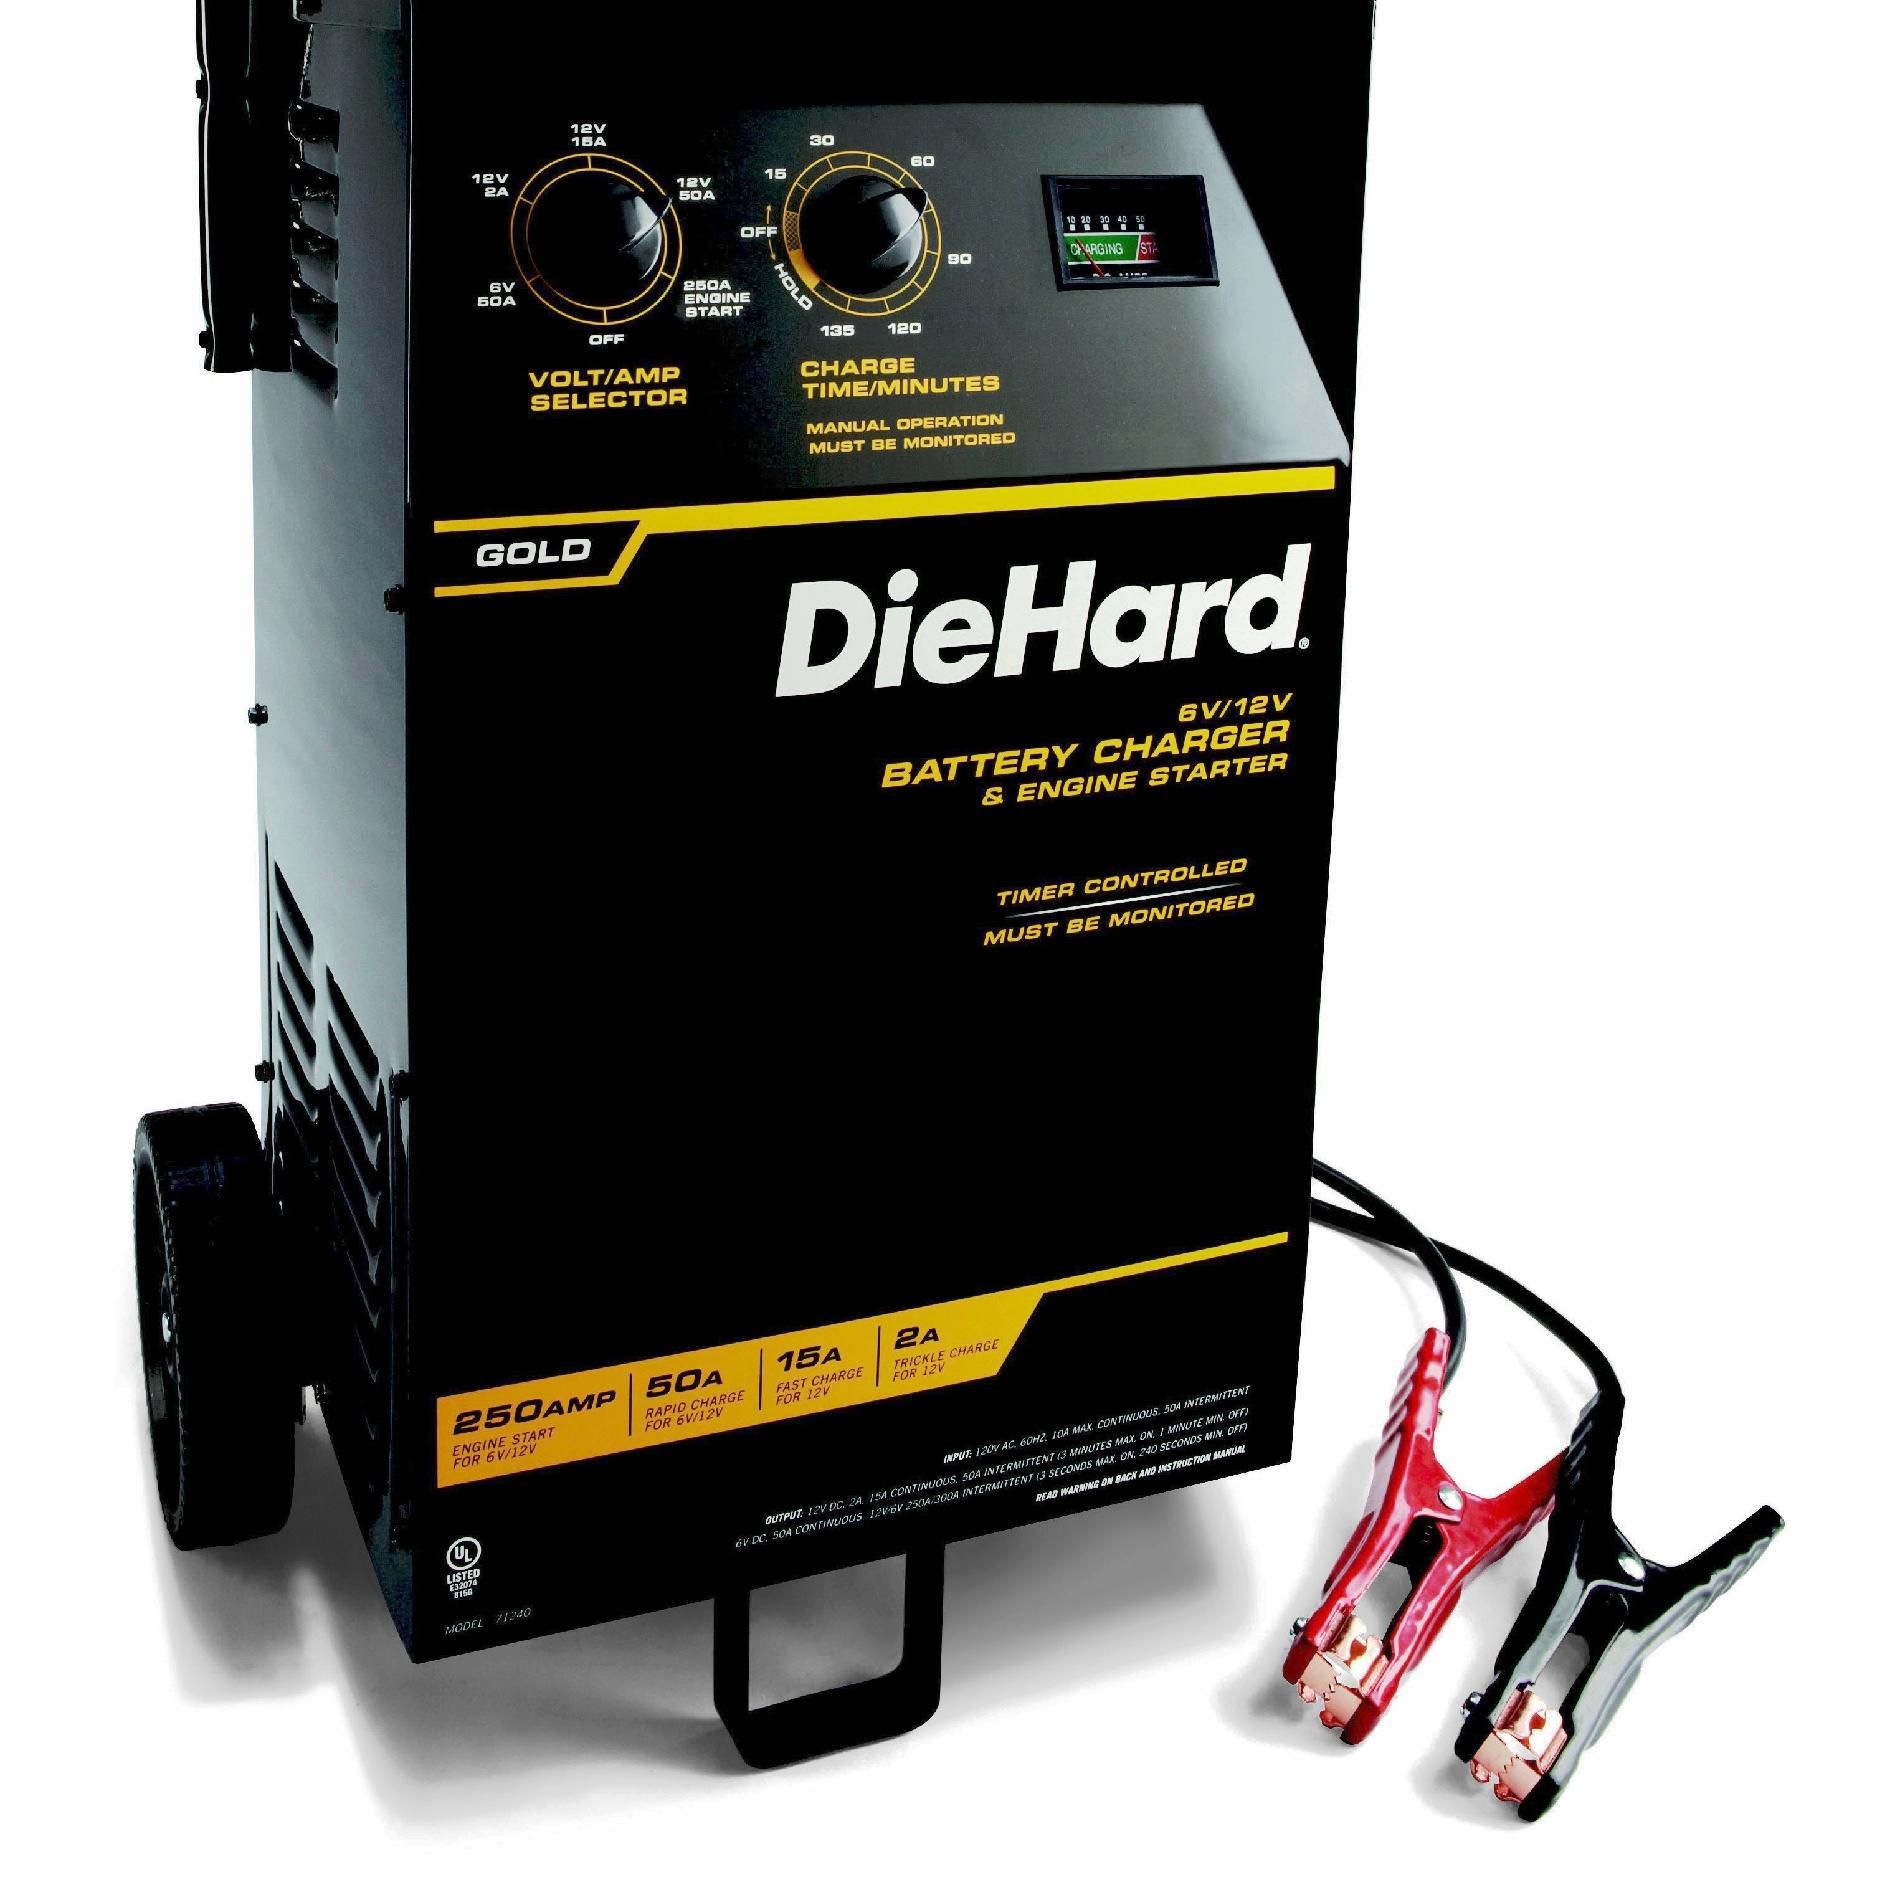 DieHard 71331 12V Smart Wheel Battery Charger and 40/200A Maintainer 